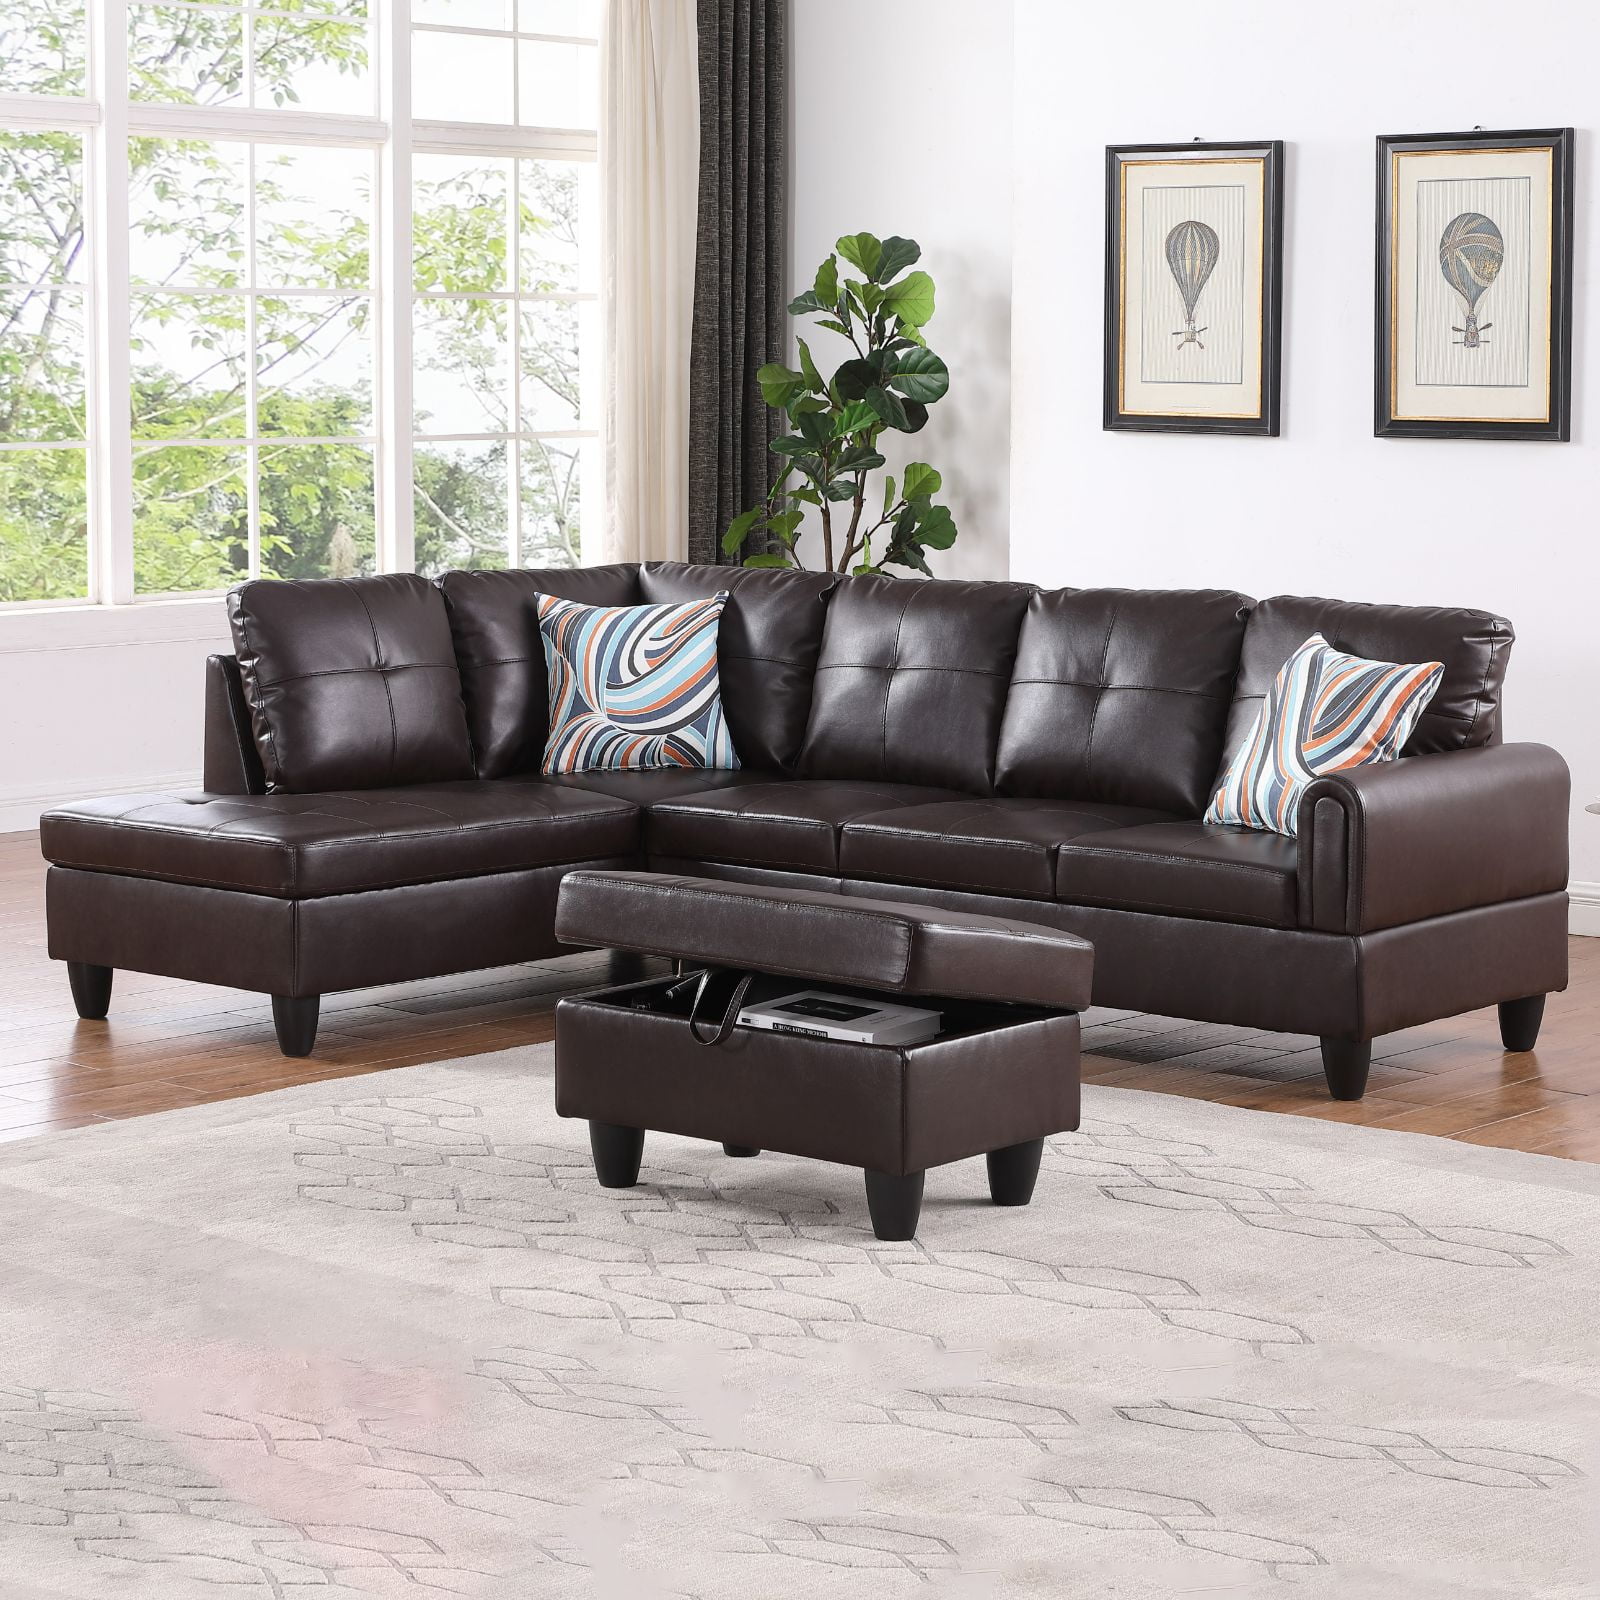 Hommoo L Shaped 4-Seat Couch, Faux Leather Sectional Couches and Sofas ...